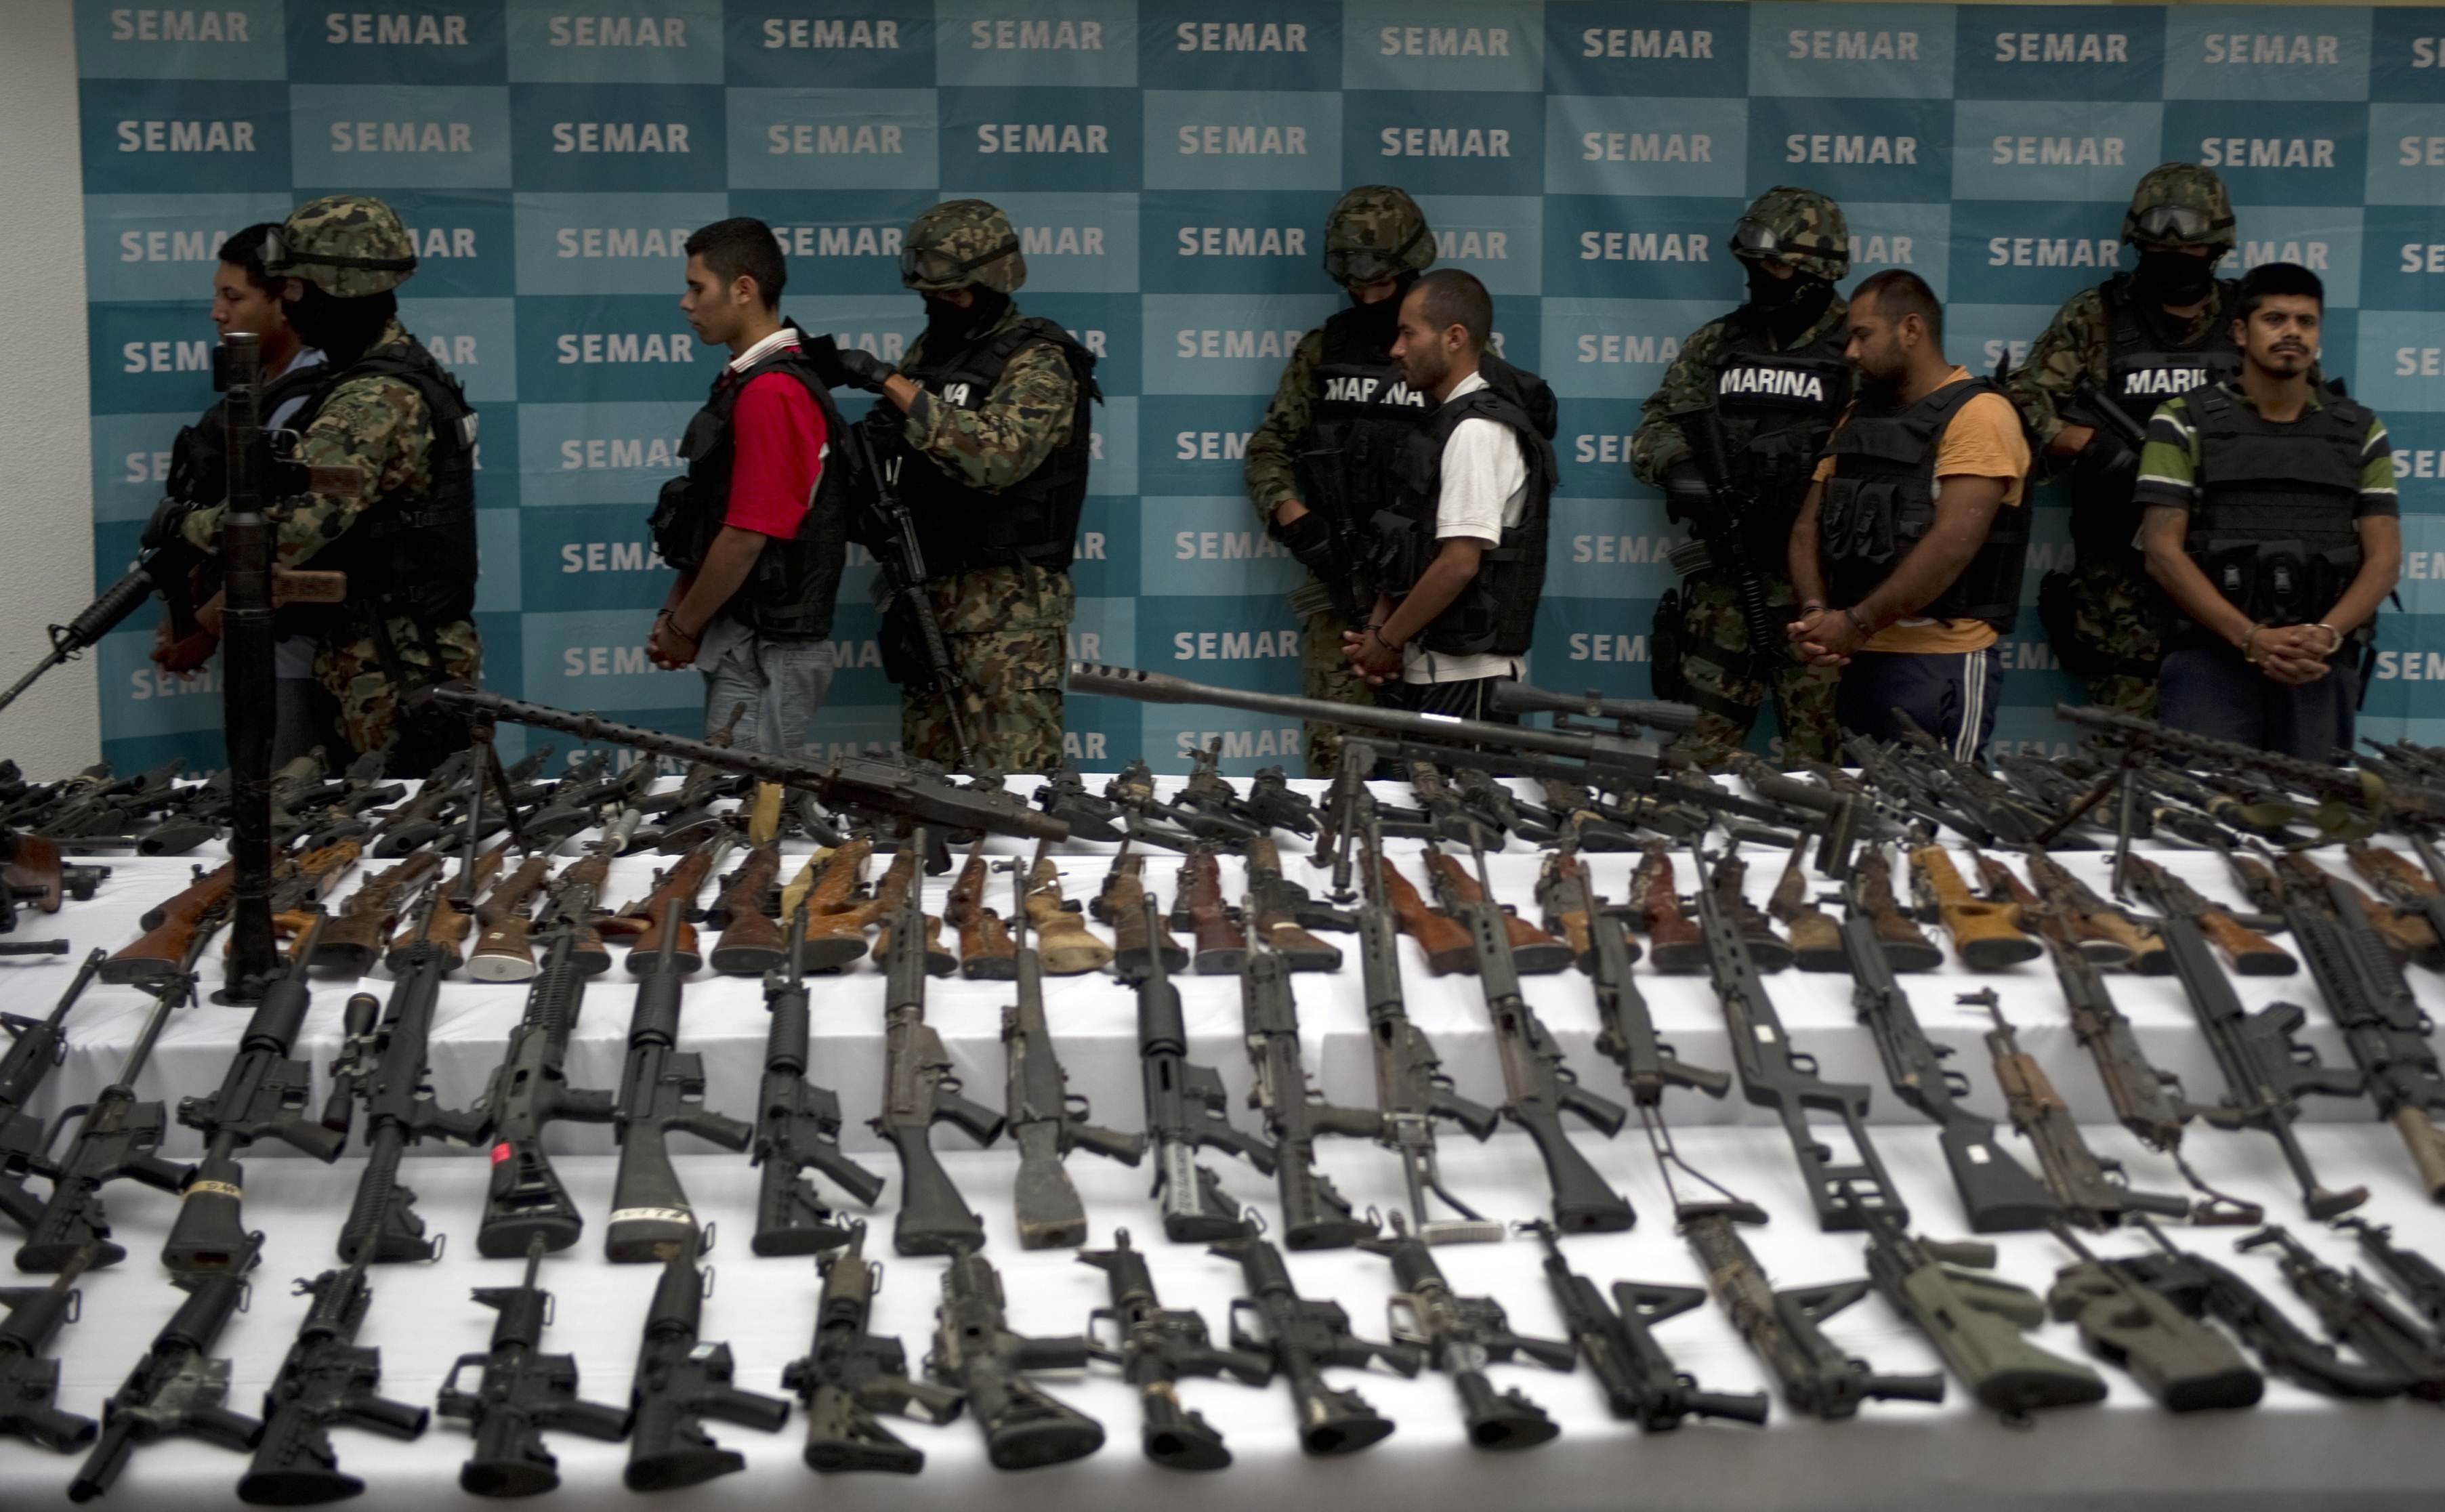 Mexican marines escort five alleged drug traffickers of the Zetas drug cartel in front seized grenades, firearms, cocaine and military uniforms in Mexico City on June 9, 2011. (Yuri Cortez/AFP/Getty Images)